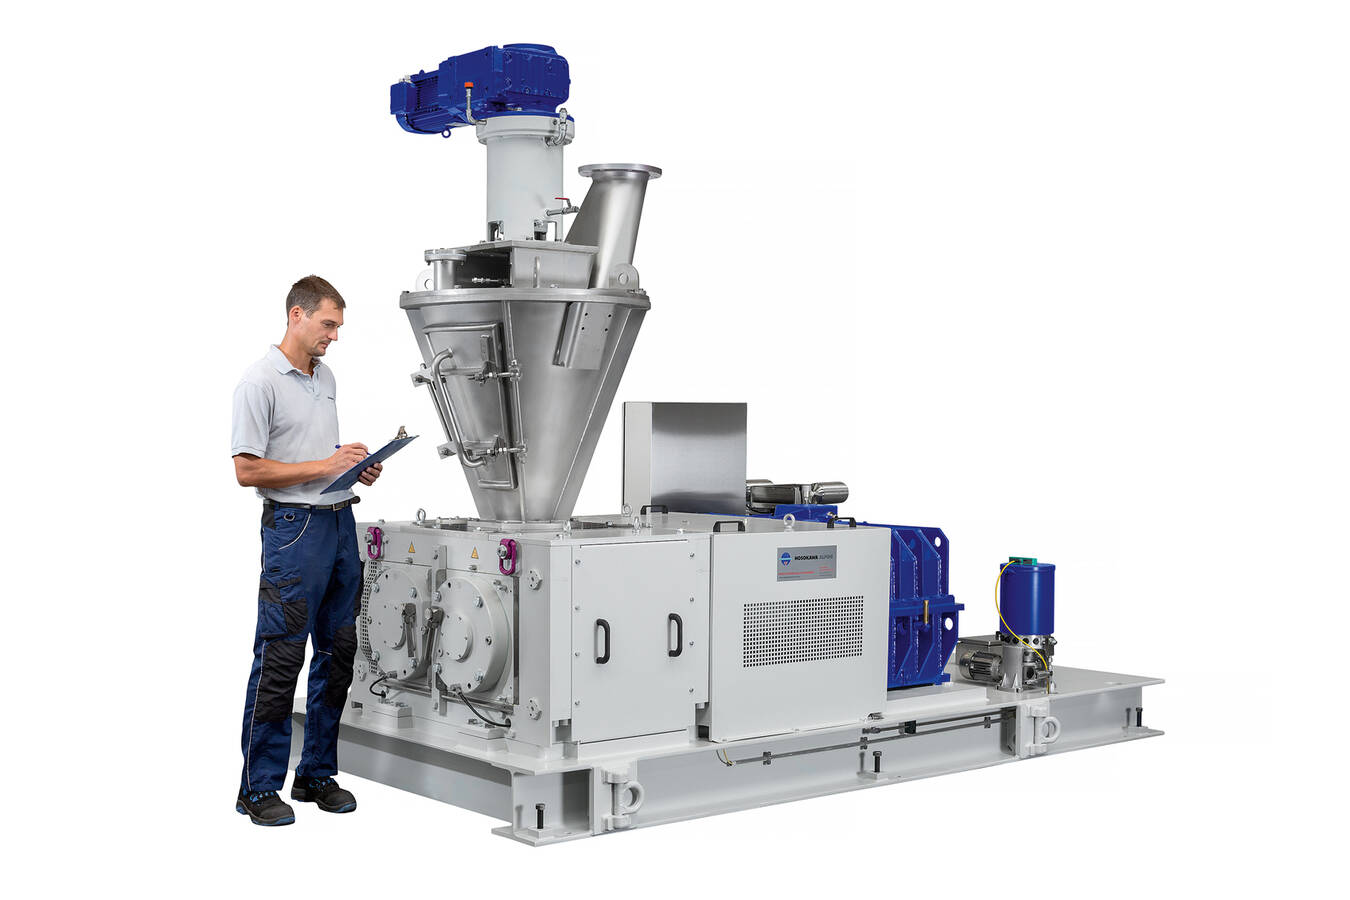 The Alpine Microburst AMB spiral jet mill is also available as a stand-alone baseline version.